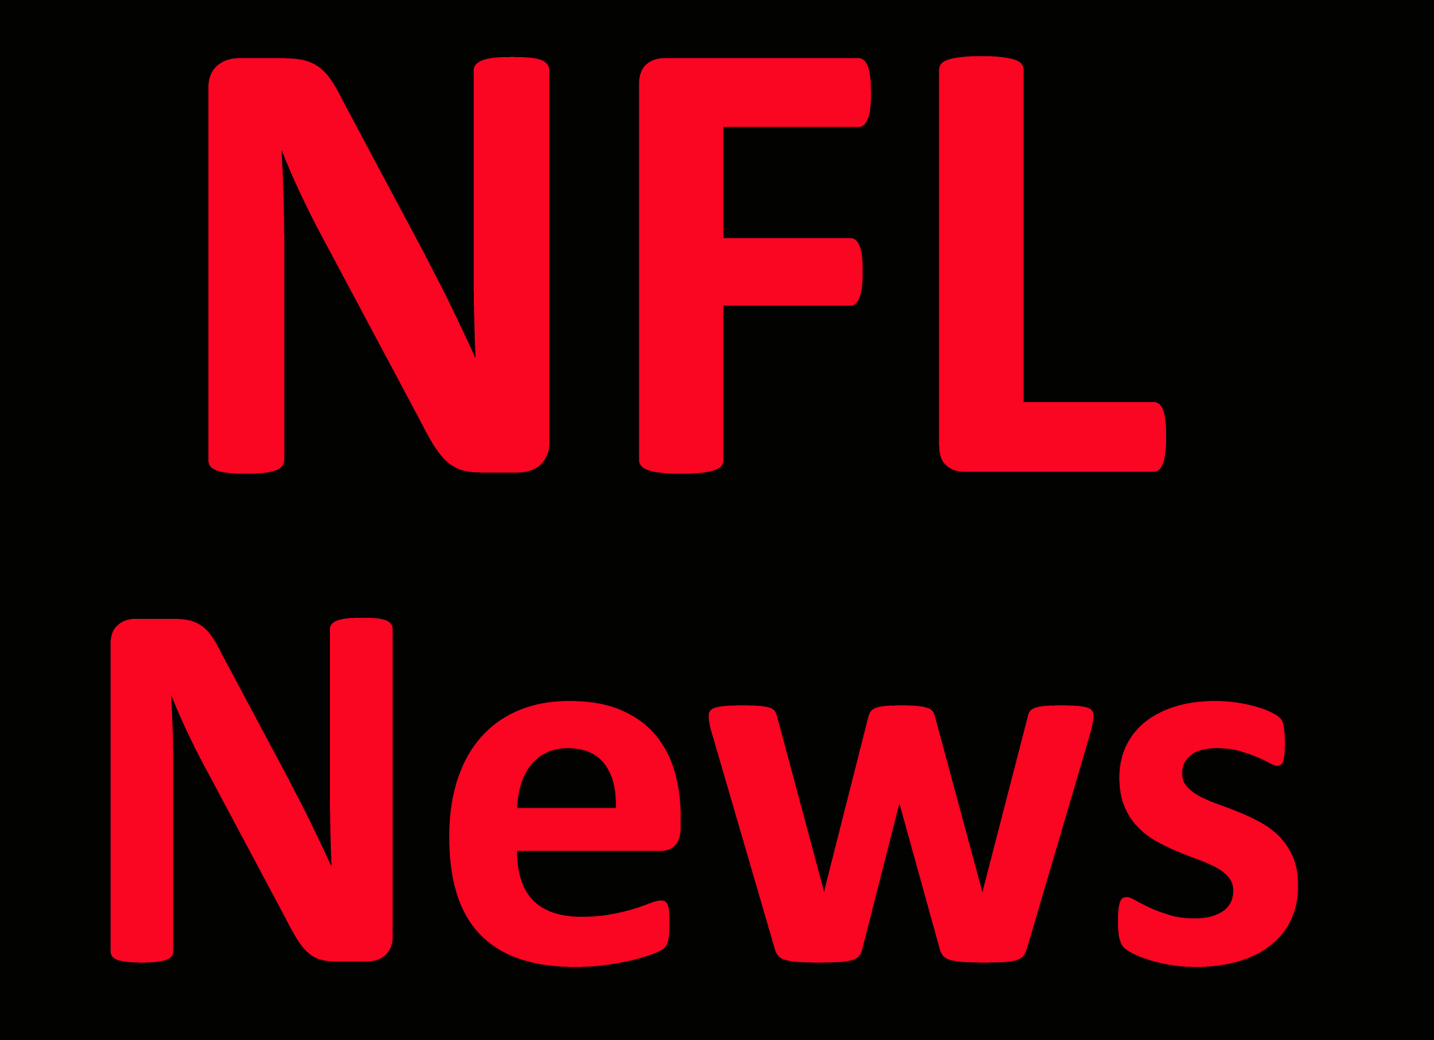 NFL News: The future of NFL betting: Why player props are expected to be king Per Report